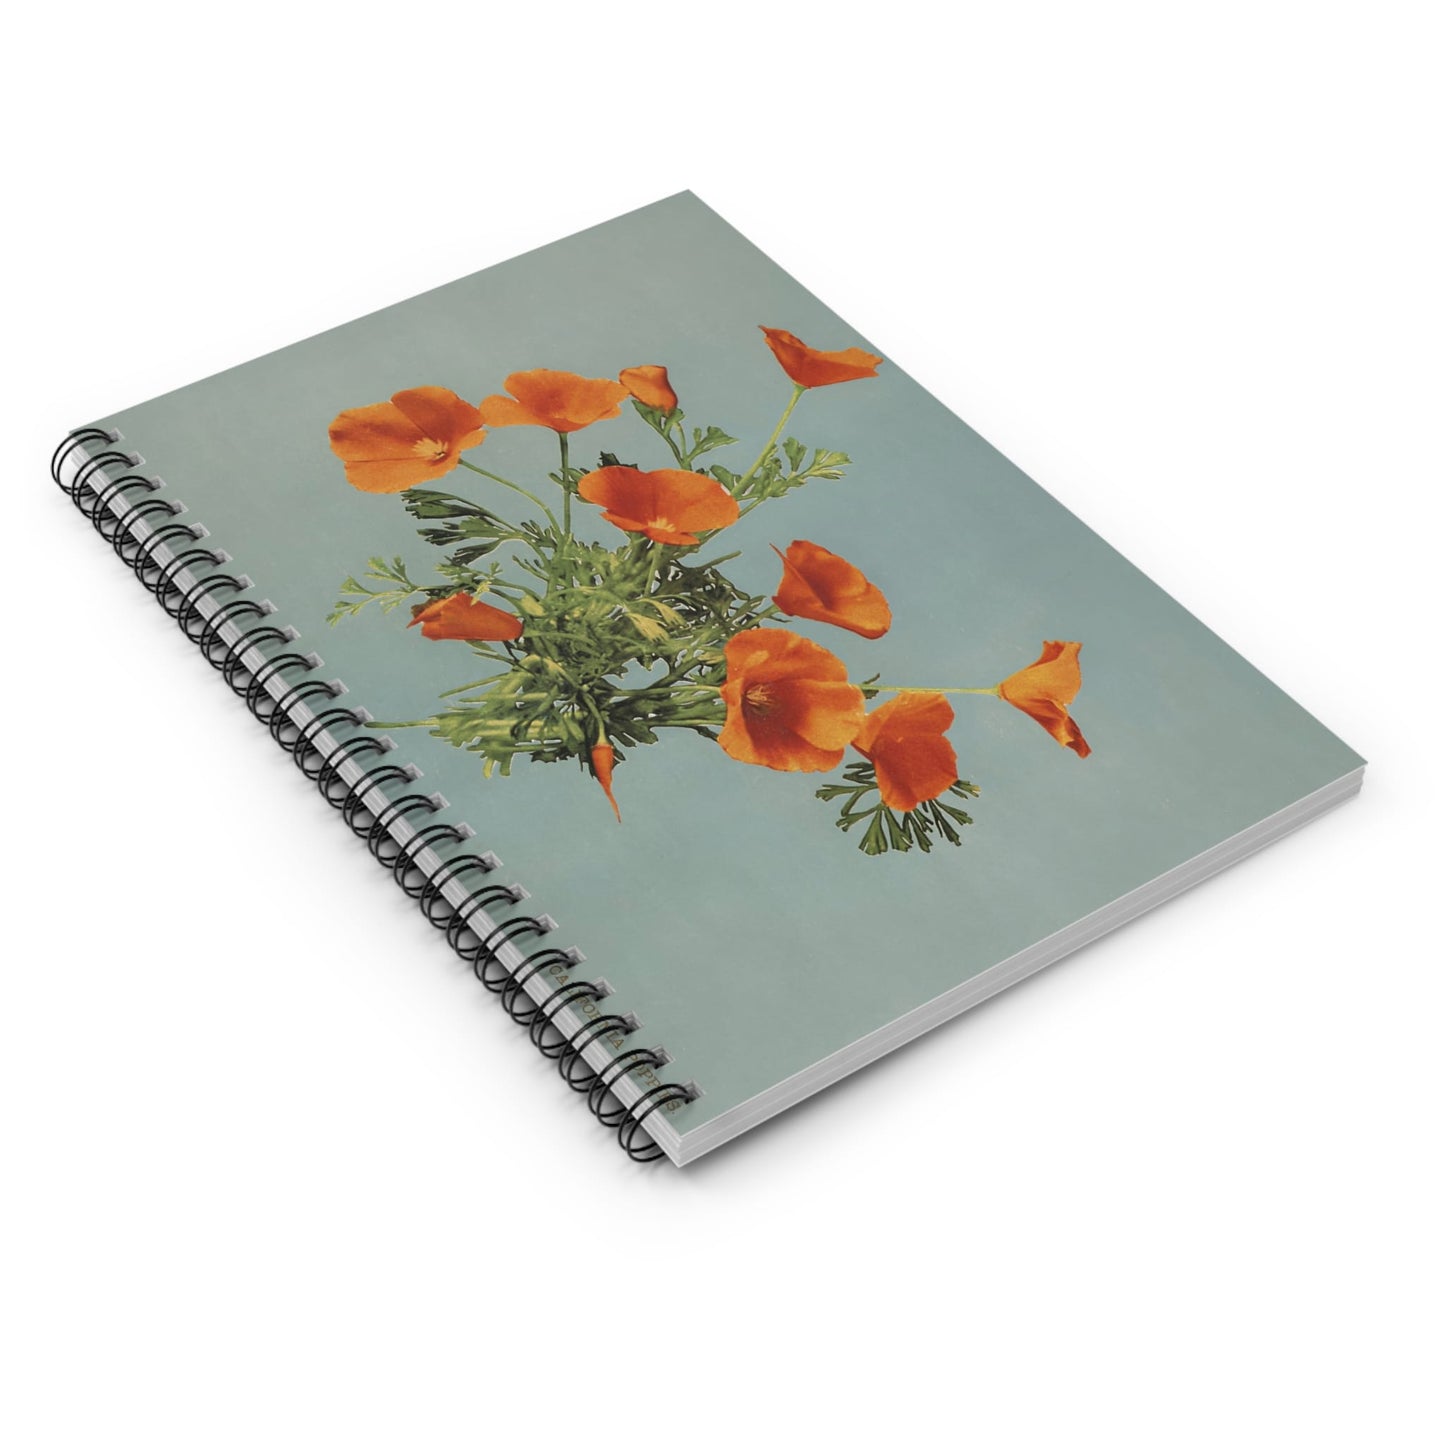 Vintage Floral Spiral Notebook Laying Flat on White Surface